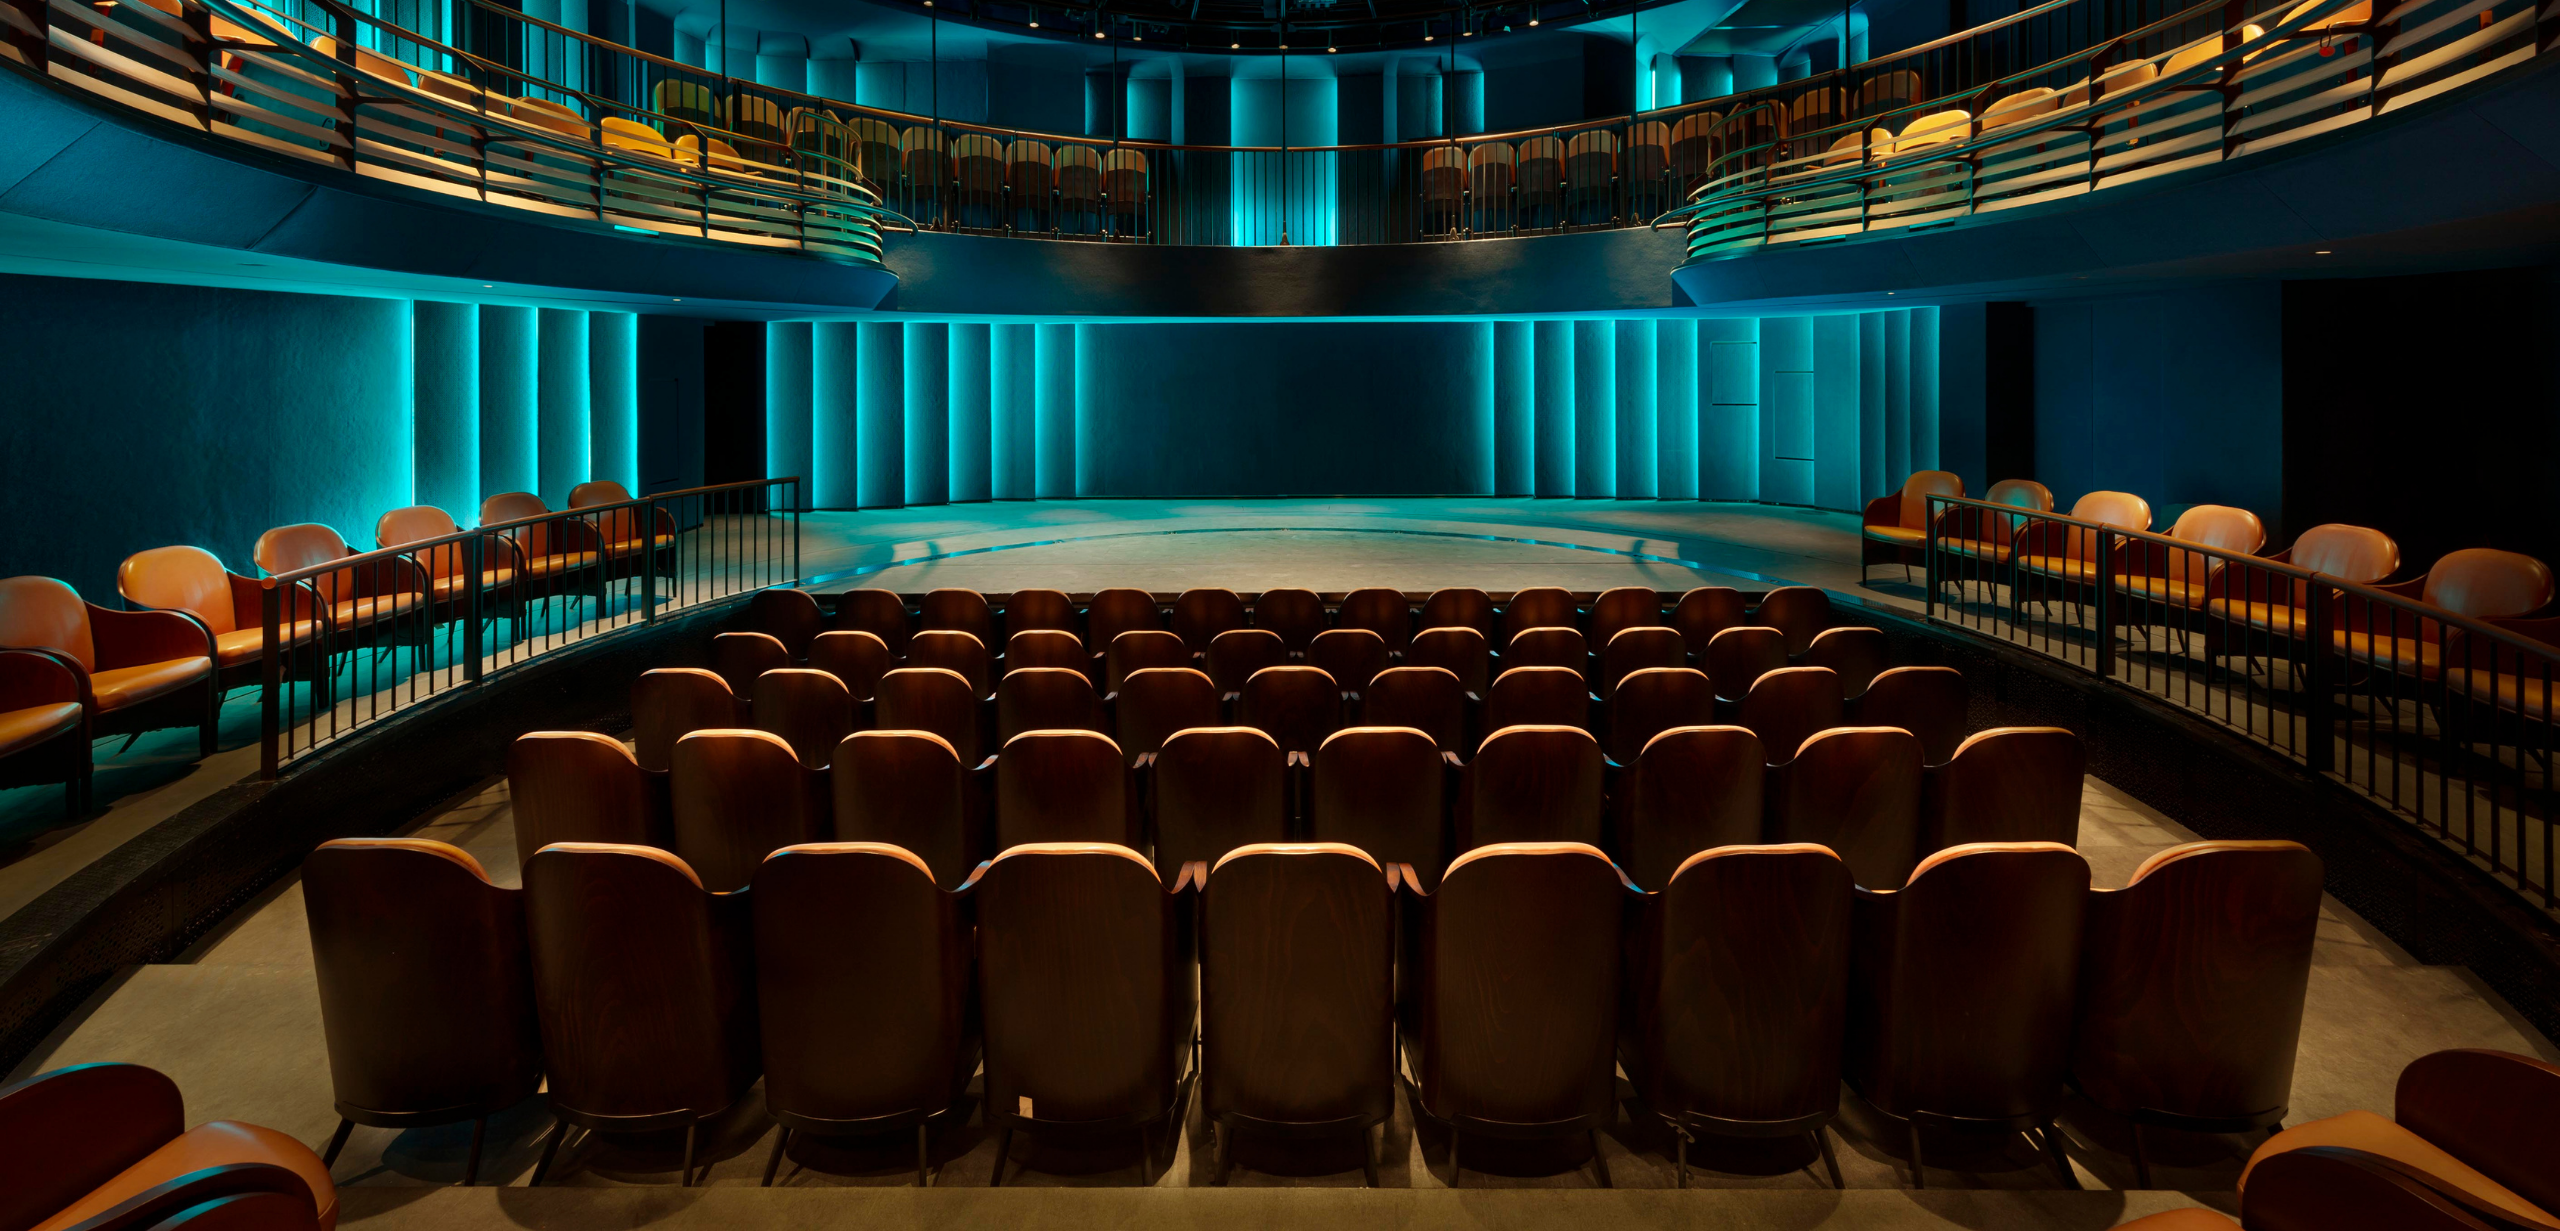 An auditorium with rows of auditorium seating and blue lighting.